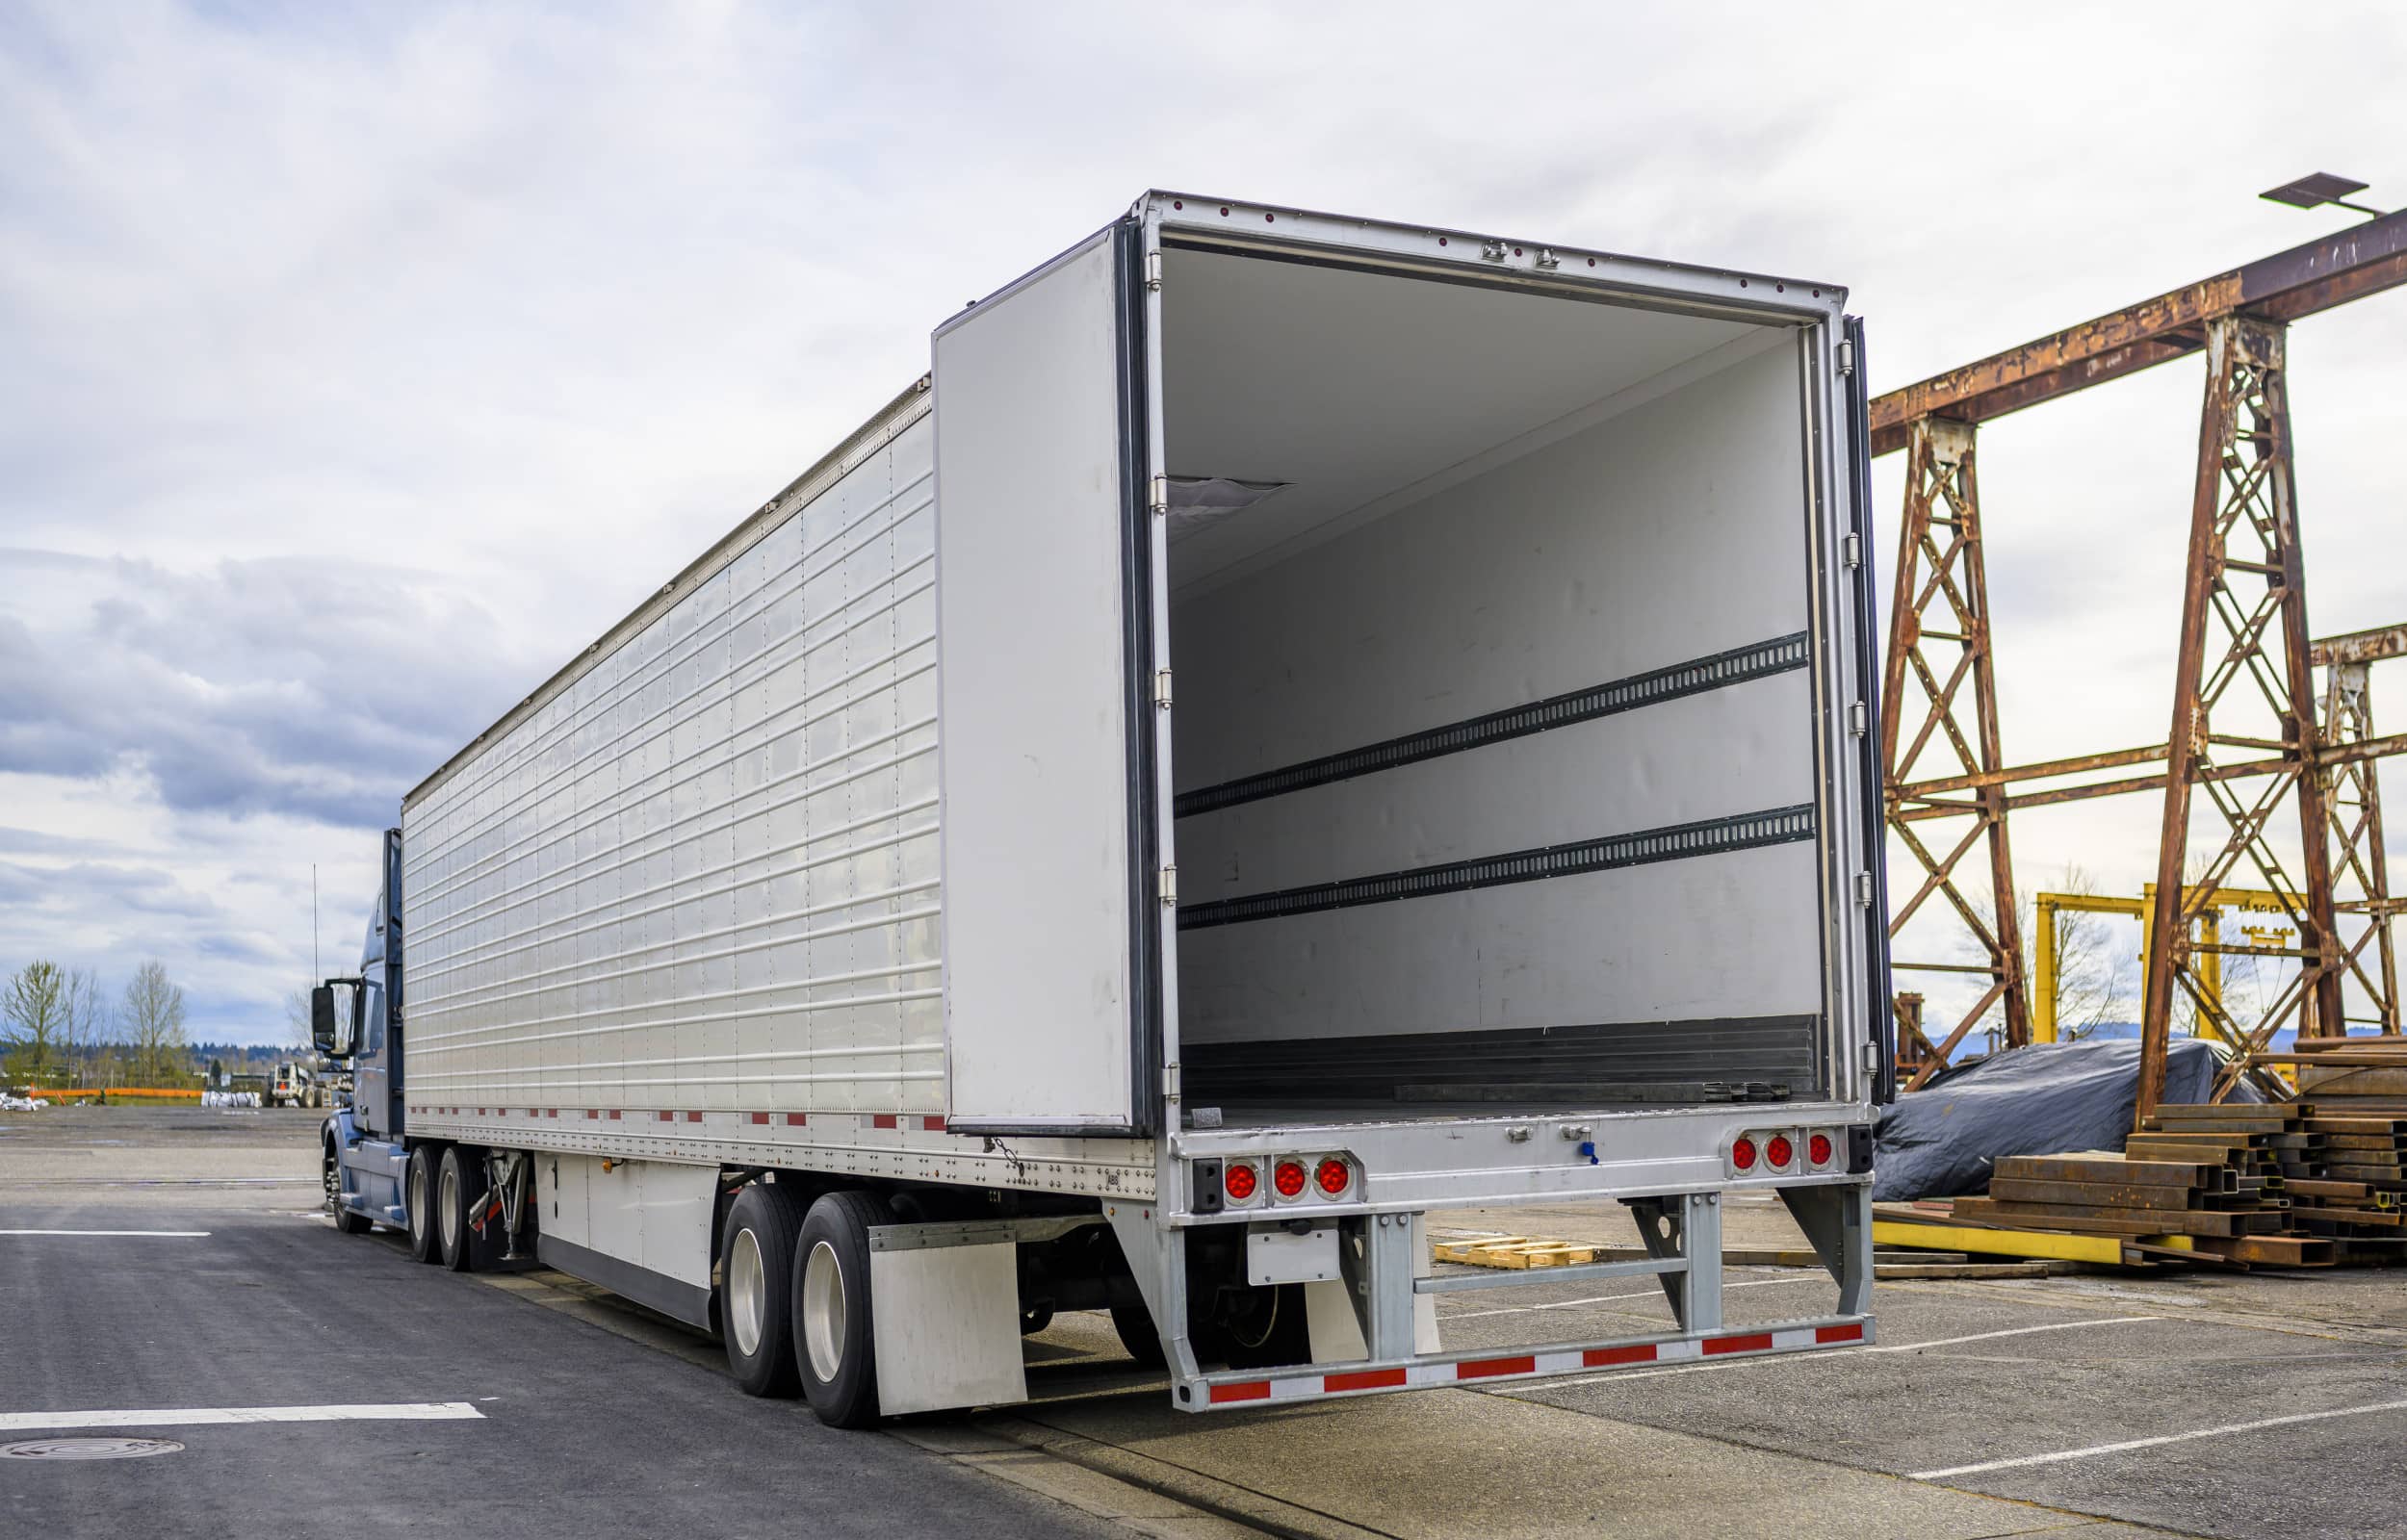 MOST PROFITABLE TYPES OF TRAILERS FOR OWNER OPERATORS